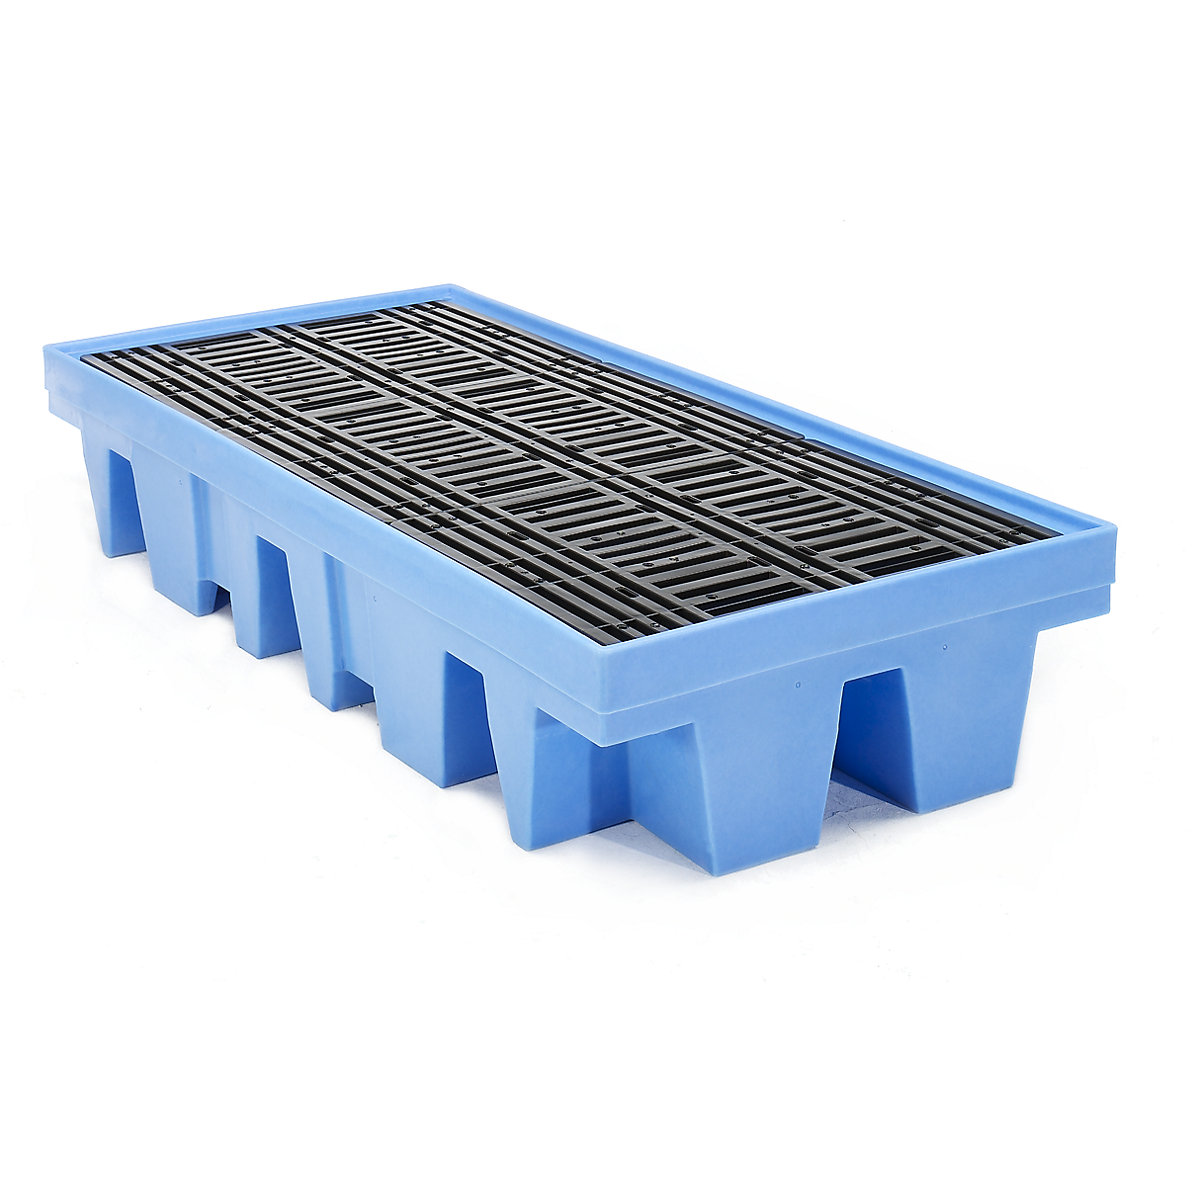 PE sump tray for IBC/CTC tank containers, with PE grate, for 2 x 1000 litre IBC/CTC-4